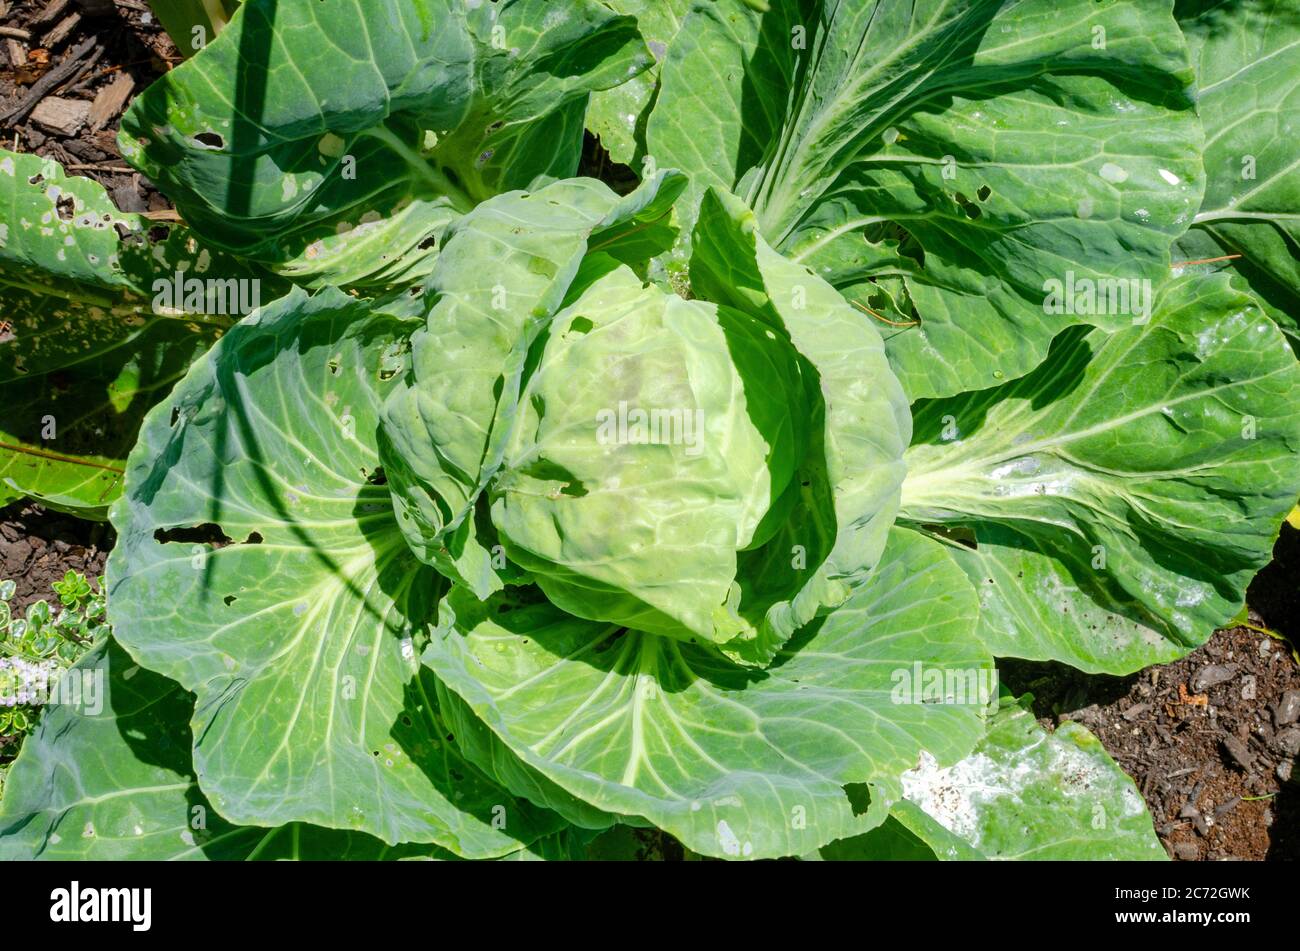 Cabbage growing in garden from above Stock Photo